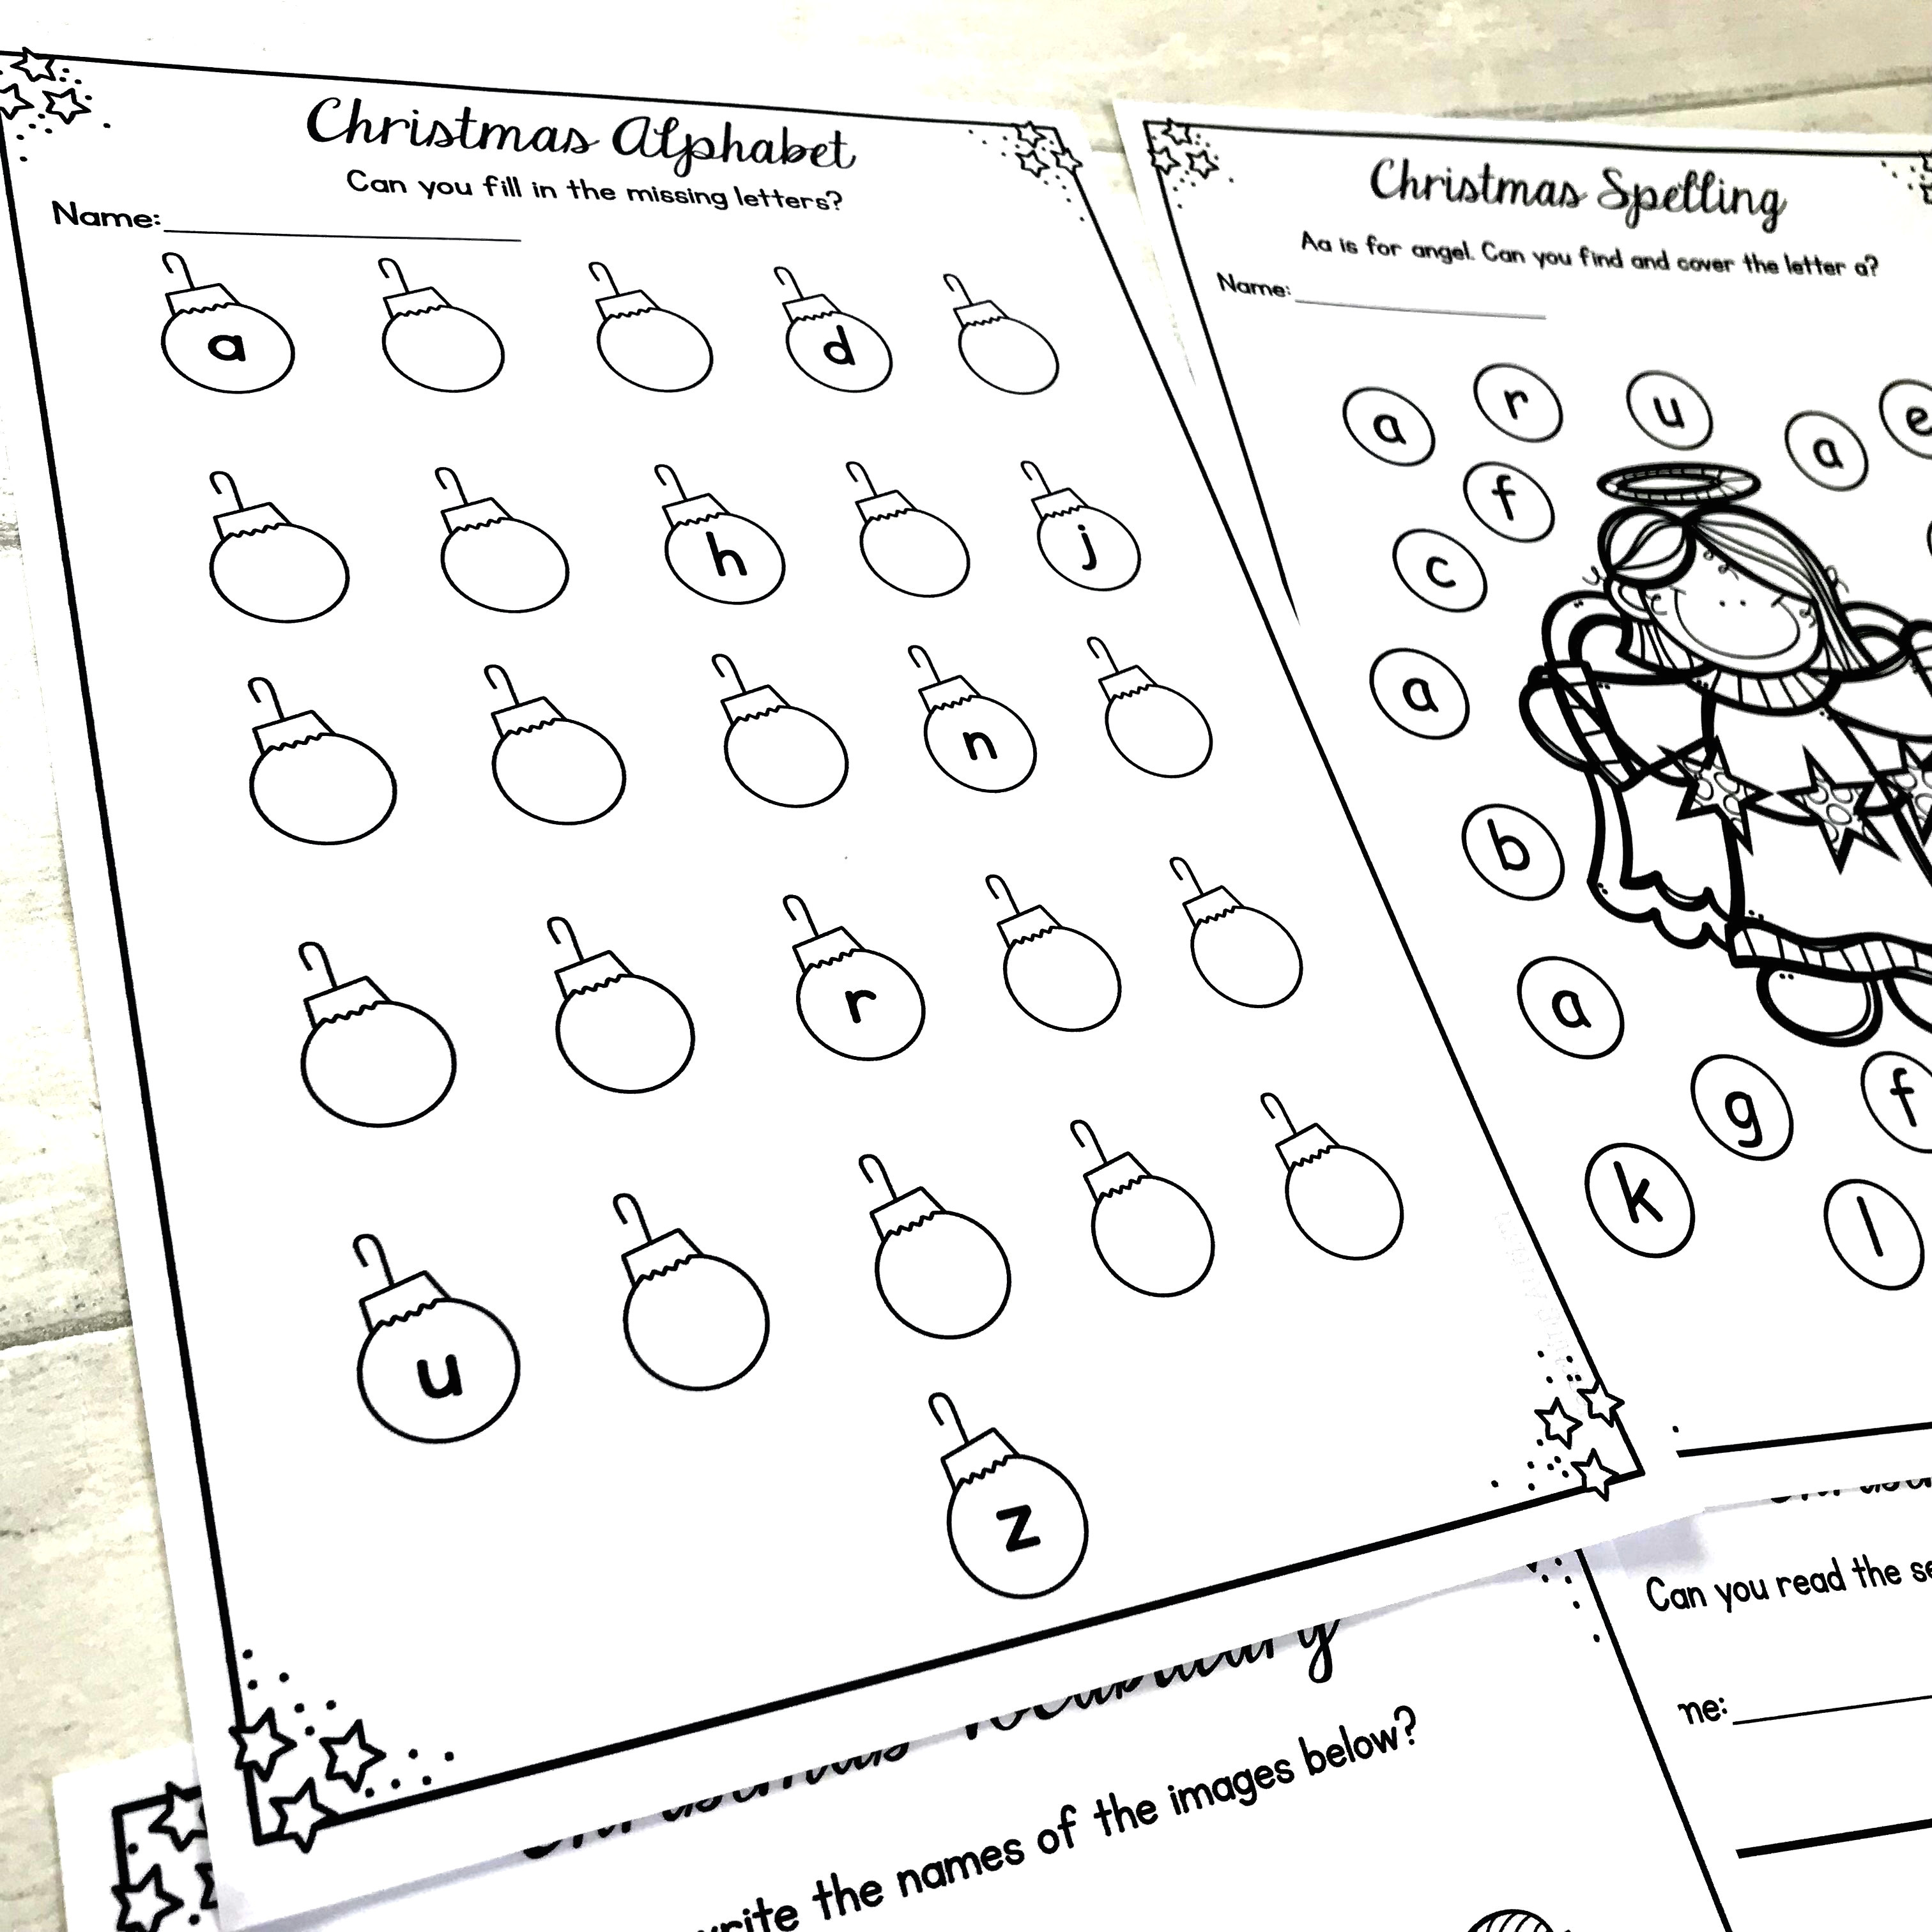 Drawing Names for Christmas Christmas Activities Literacy Worksheets No Prep Teaching Autism